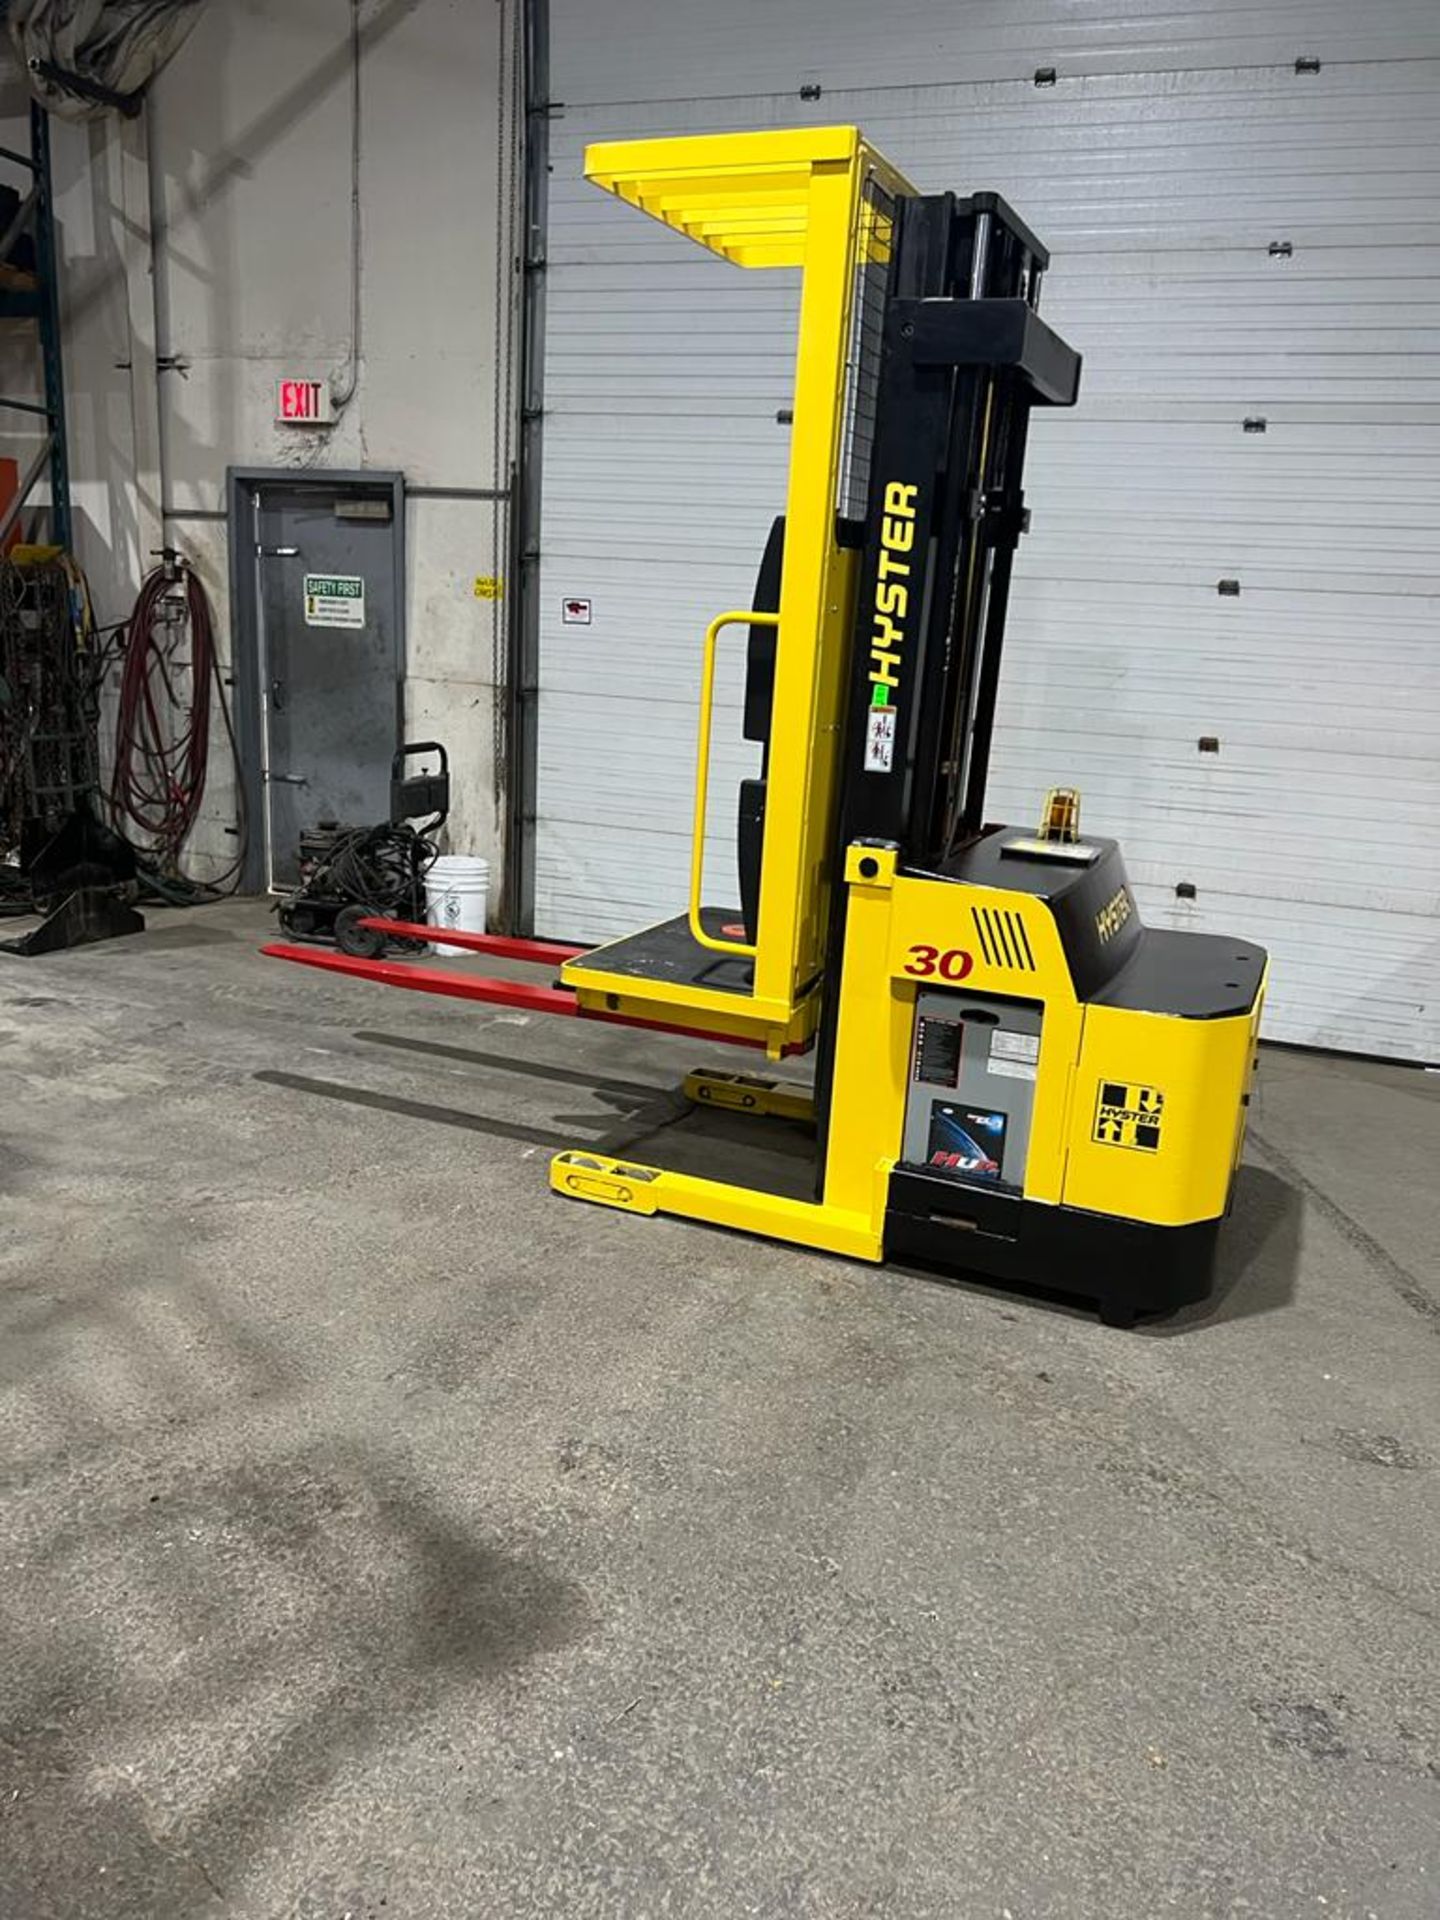 2015 Hyster Order Picker 3000lbs capacity electric Powered Pallet Cart 24V battery - FREE CUSTOMS